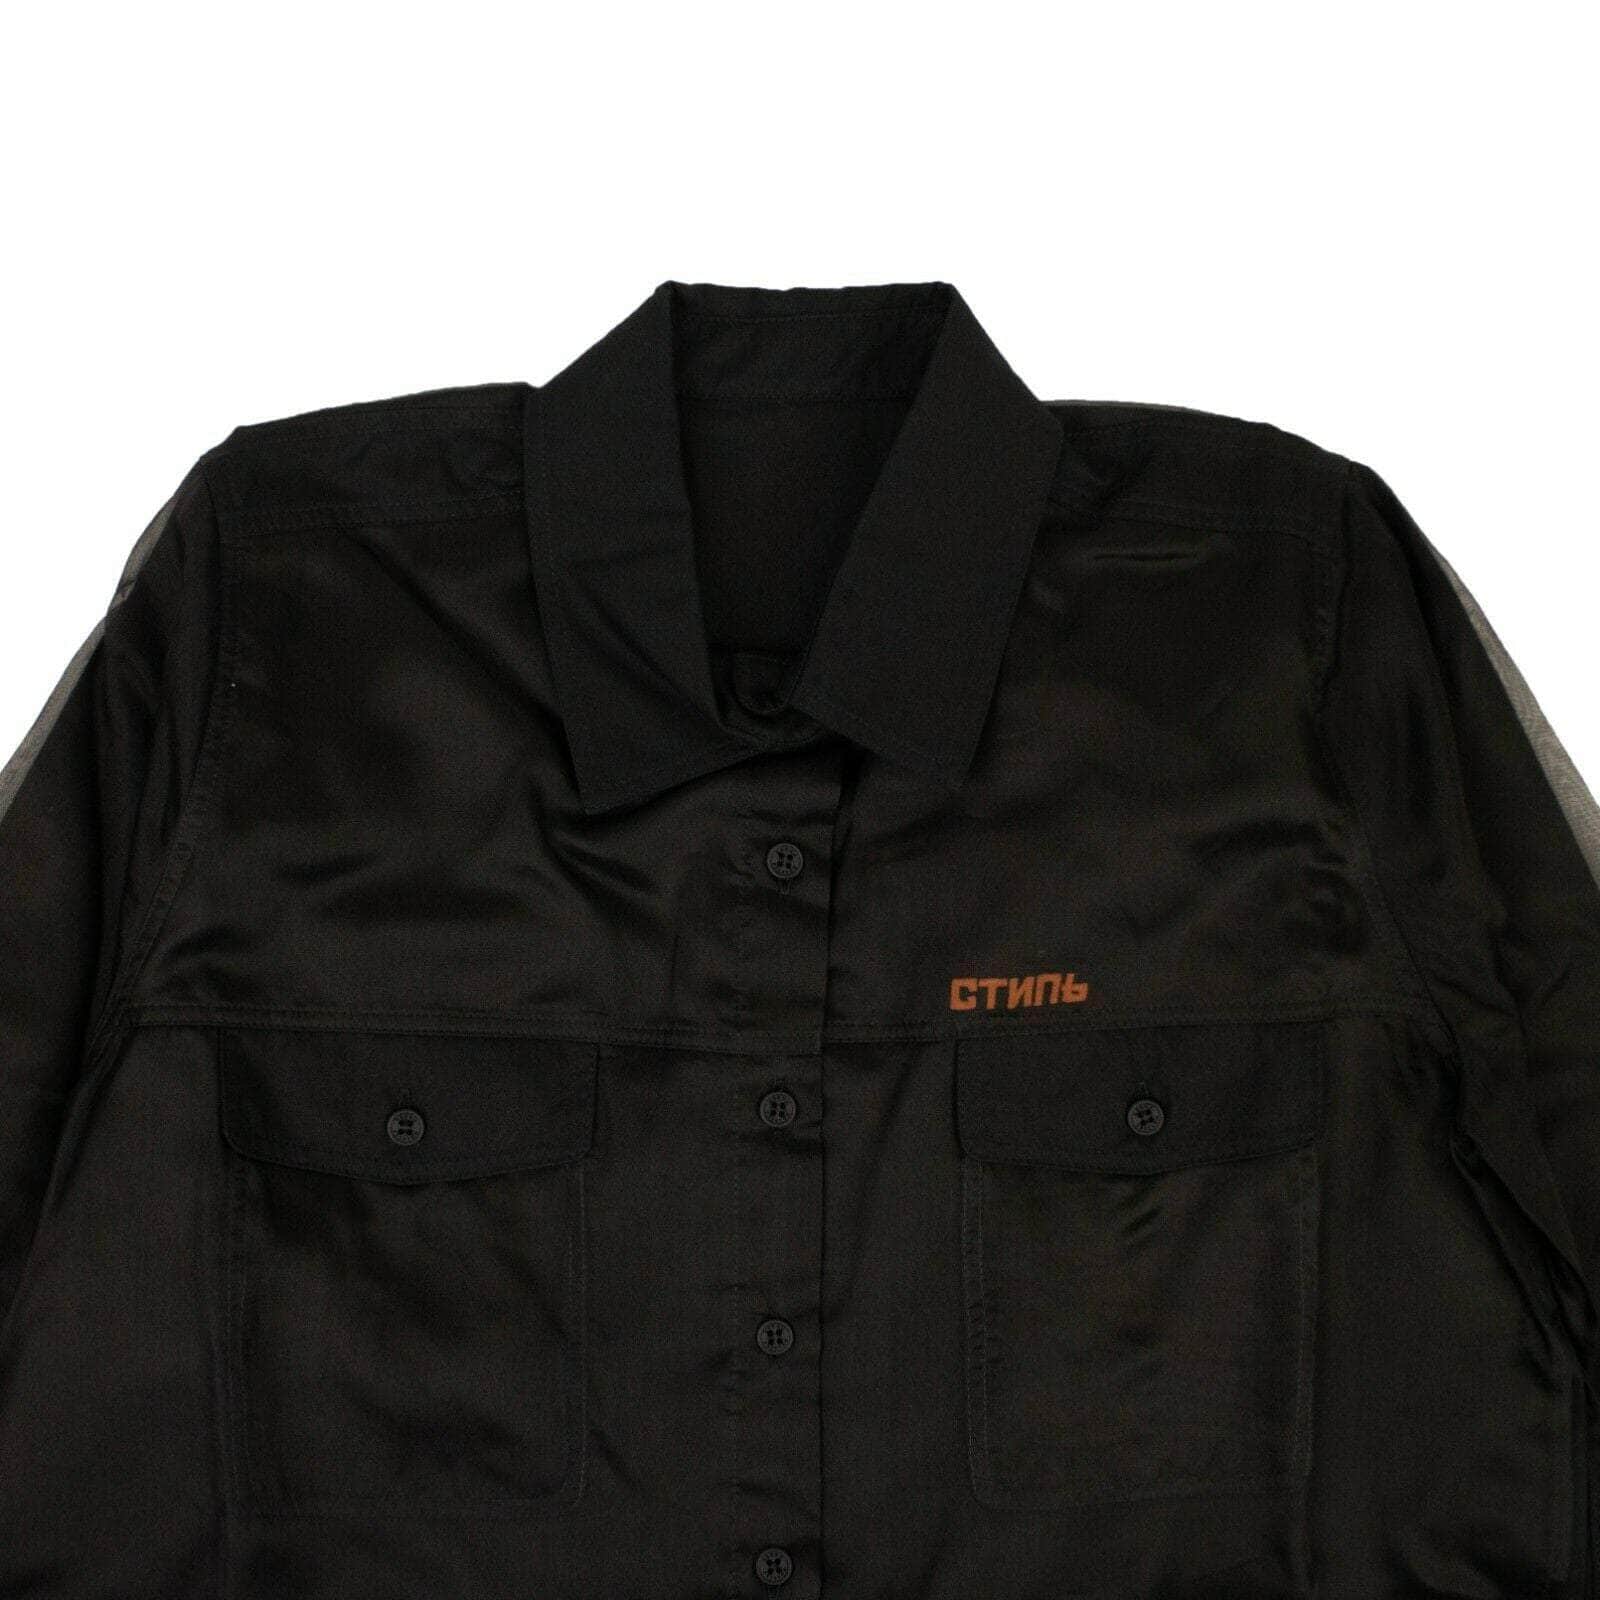 Heron Preston 250-500, channelenable-all, chicmi, couponcollection, gender-womens, heron-preston, main-clothing, main-outerwear, size-m, size-s S Women's Black Double Layer Silk Shirt 82NGG-HP-1216/S 82NGG-HP-1216/S